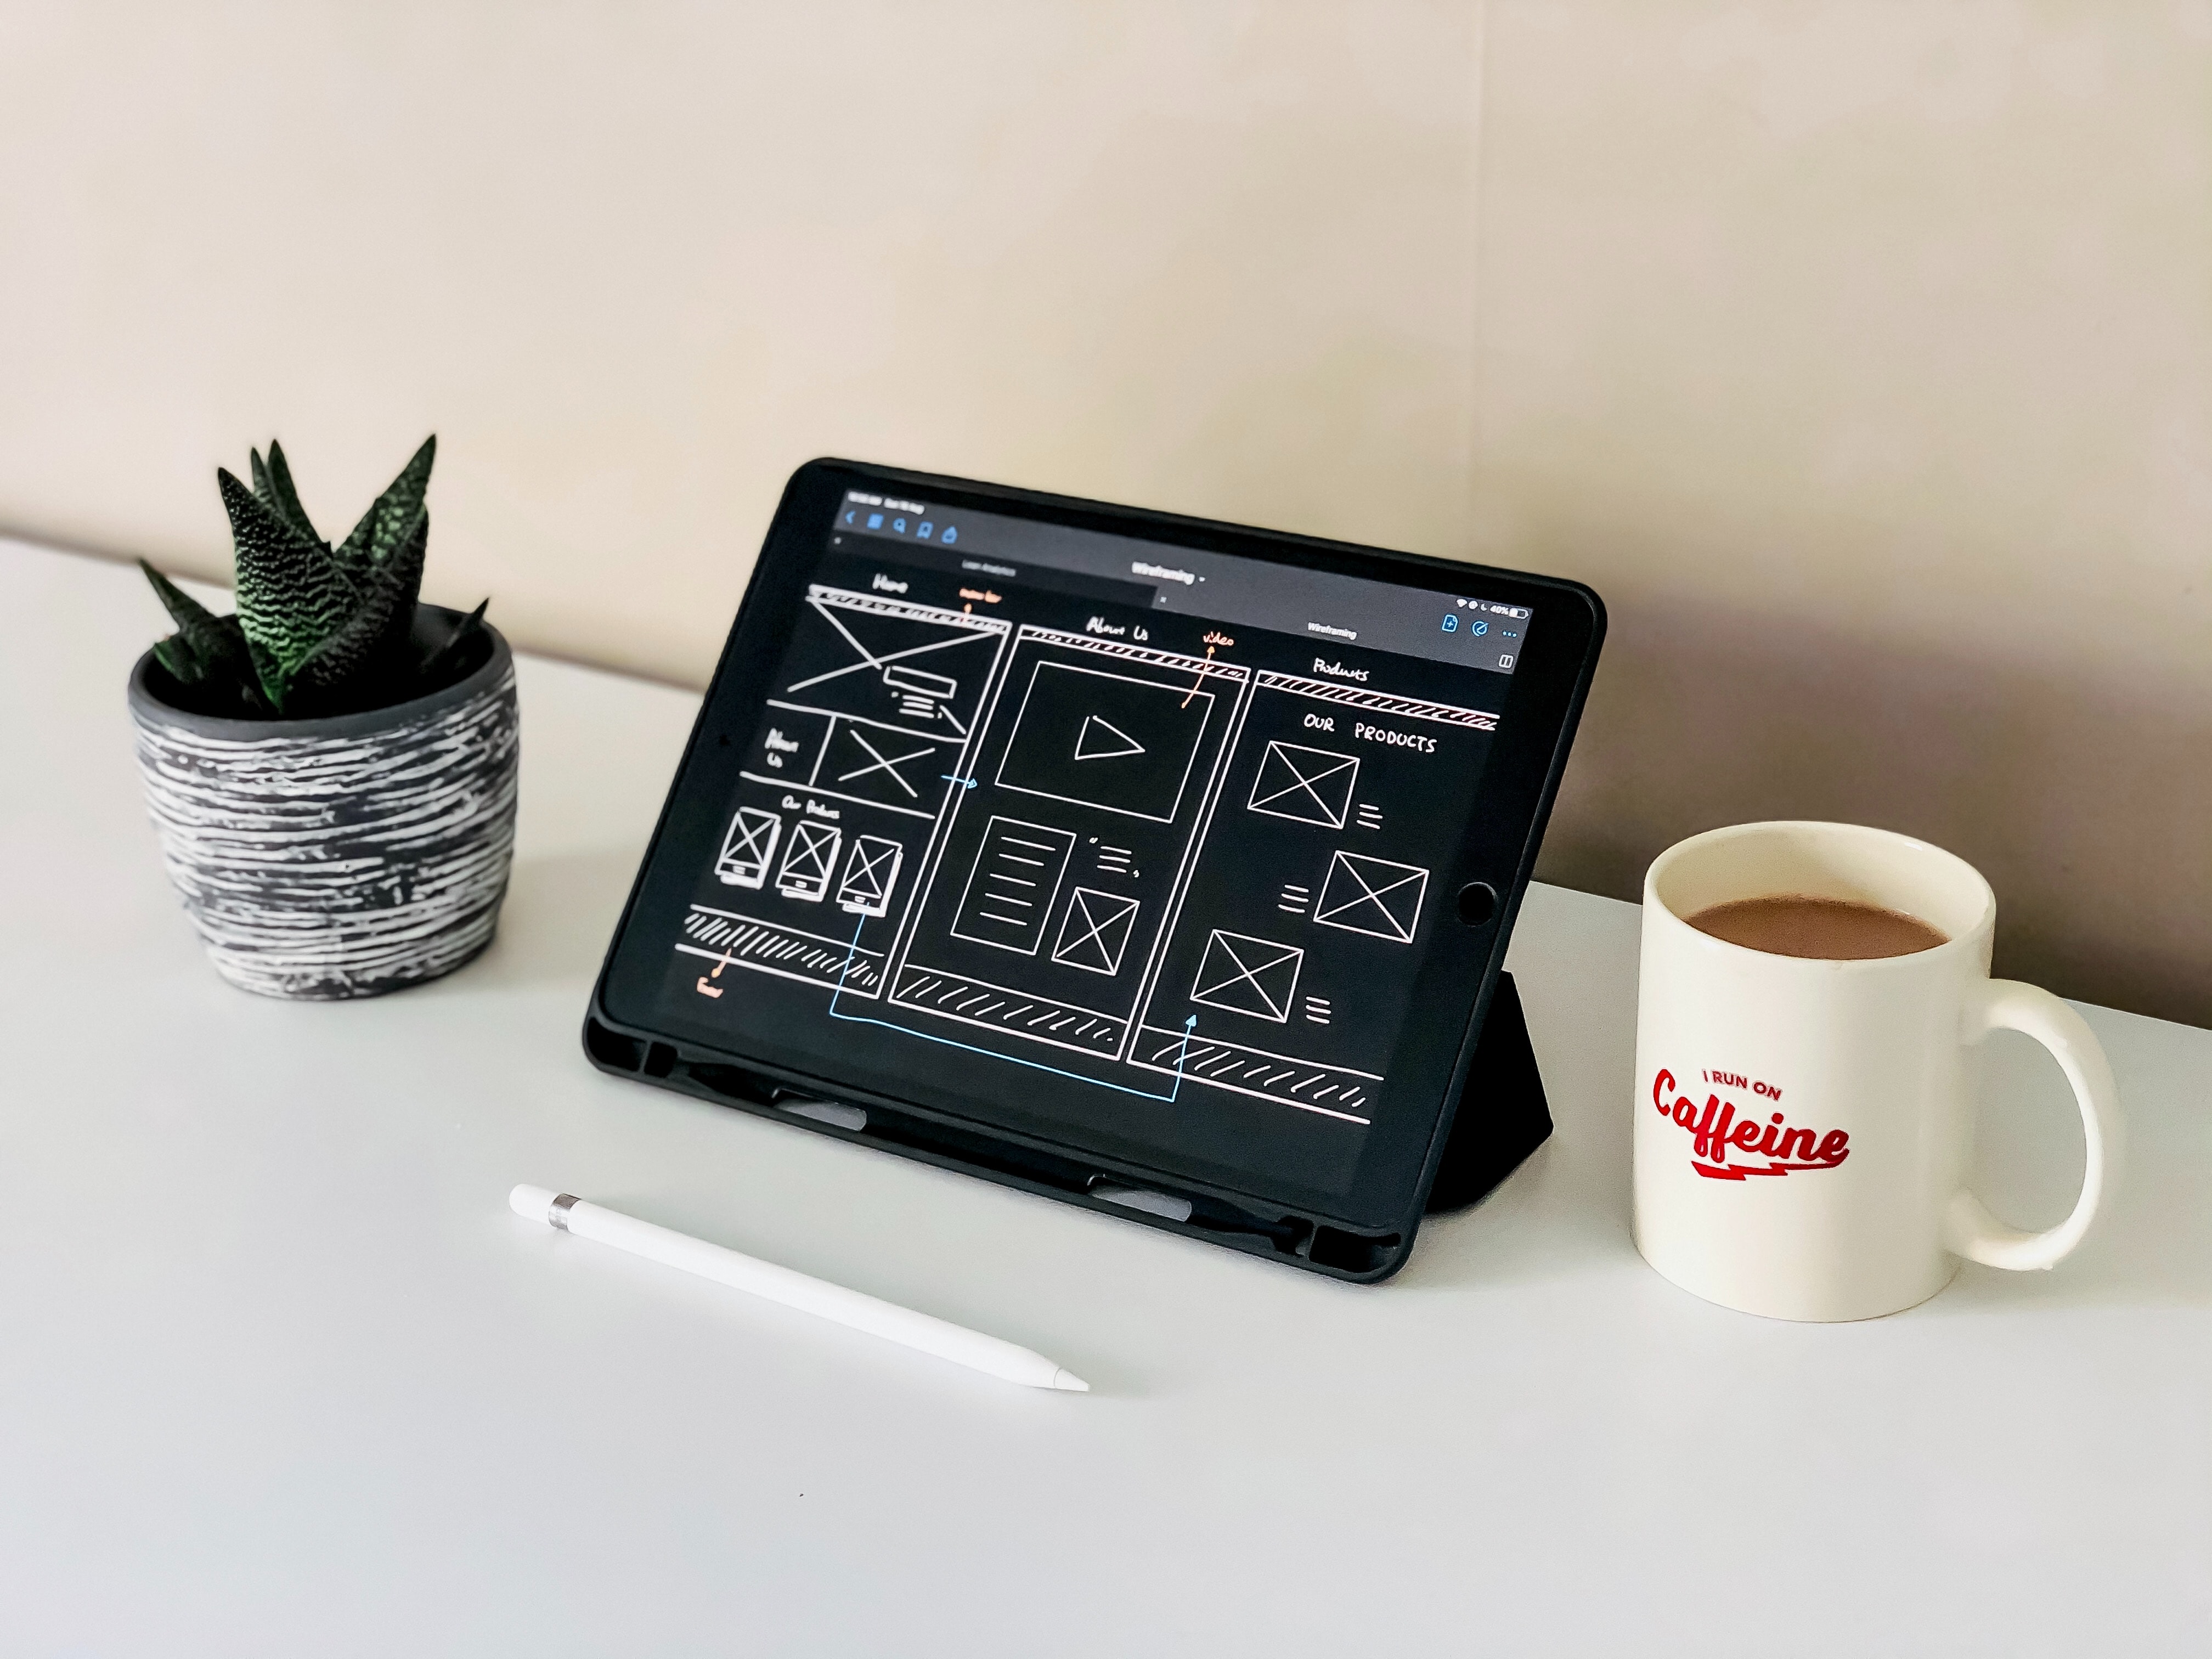 Hand-drawn wireframes on a tablet